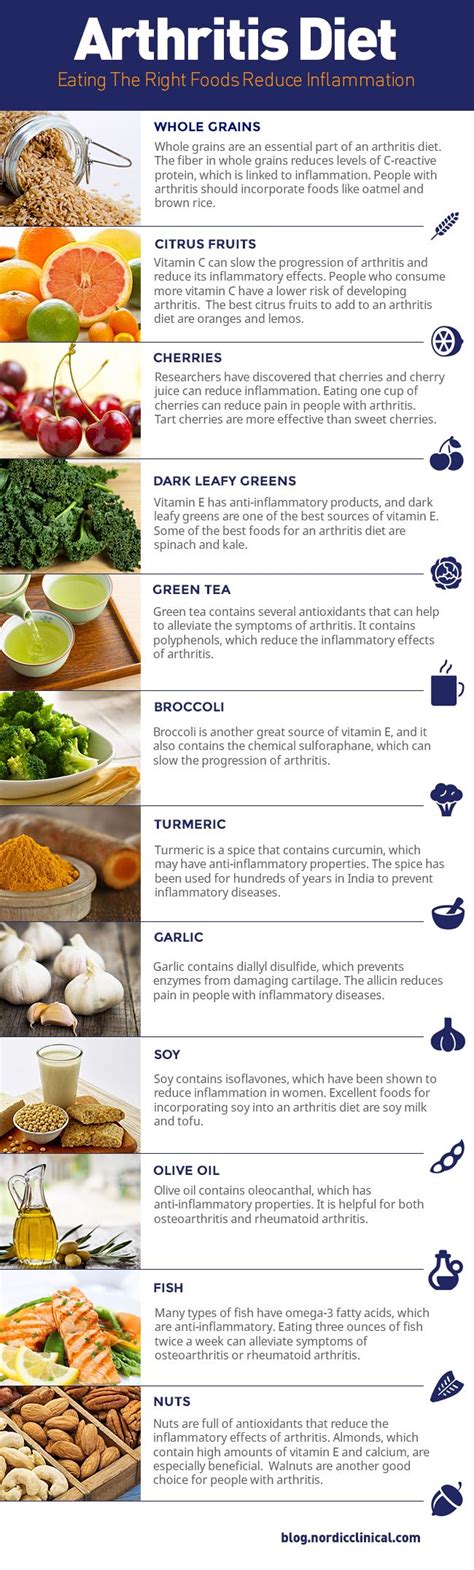 Arthritis Diet: The Best Foods For Reducing Inflammation Infographic